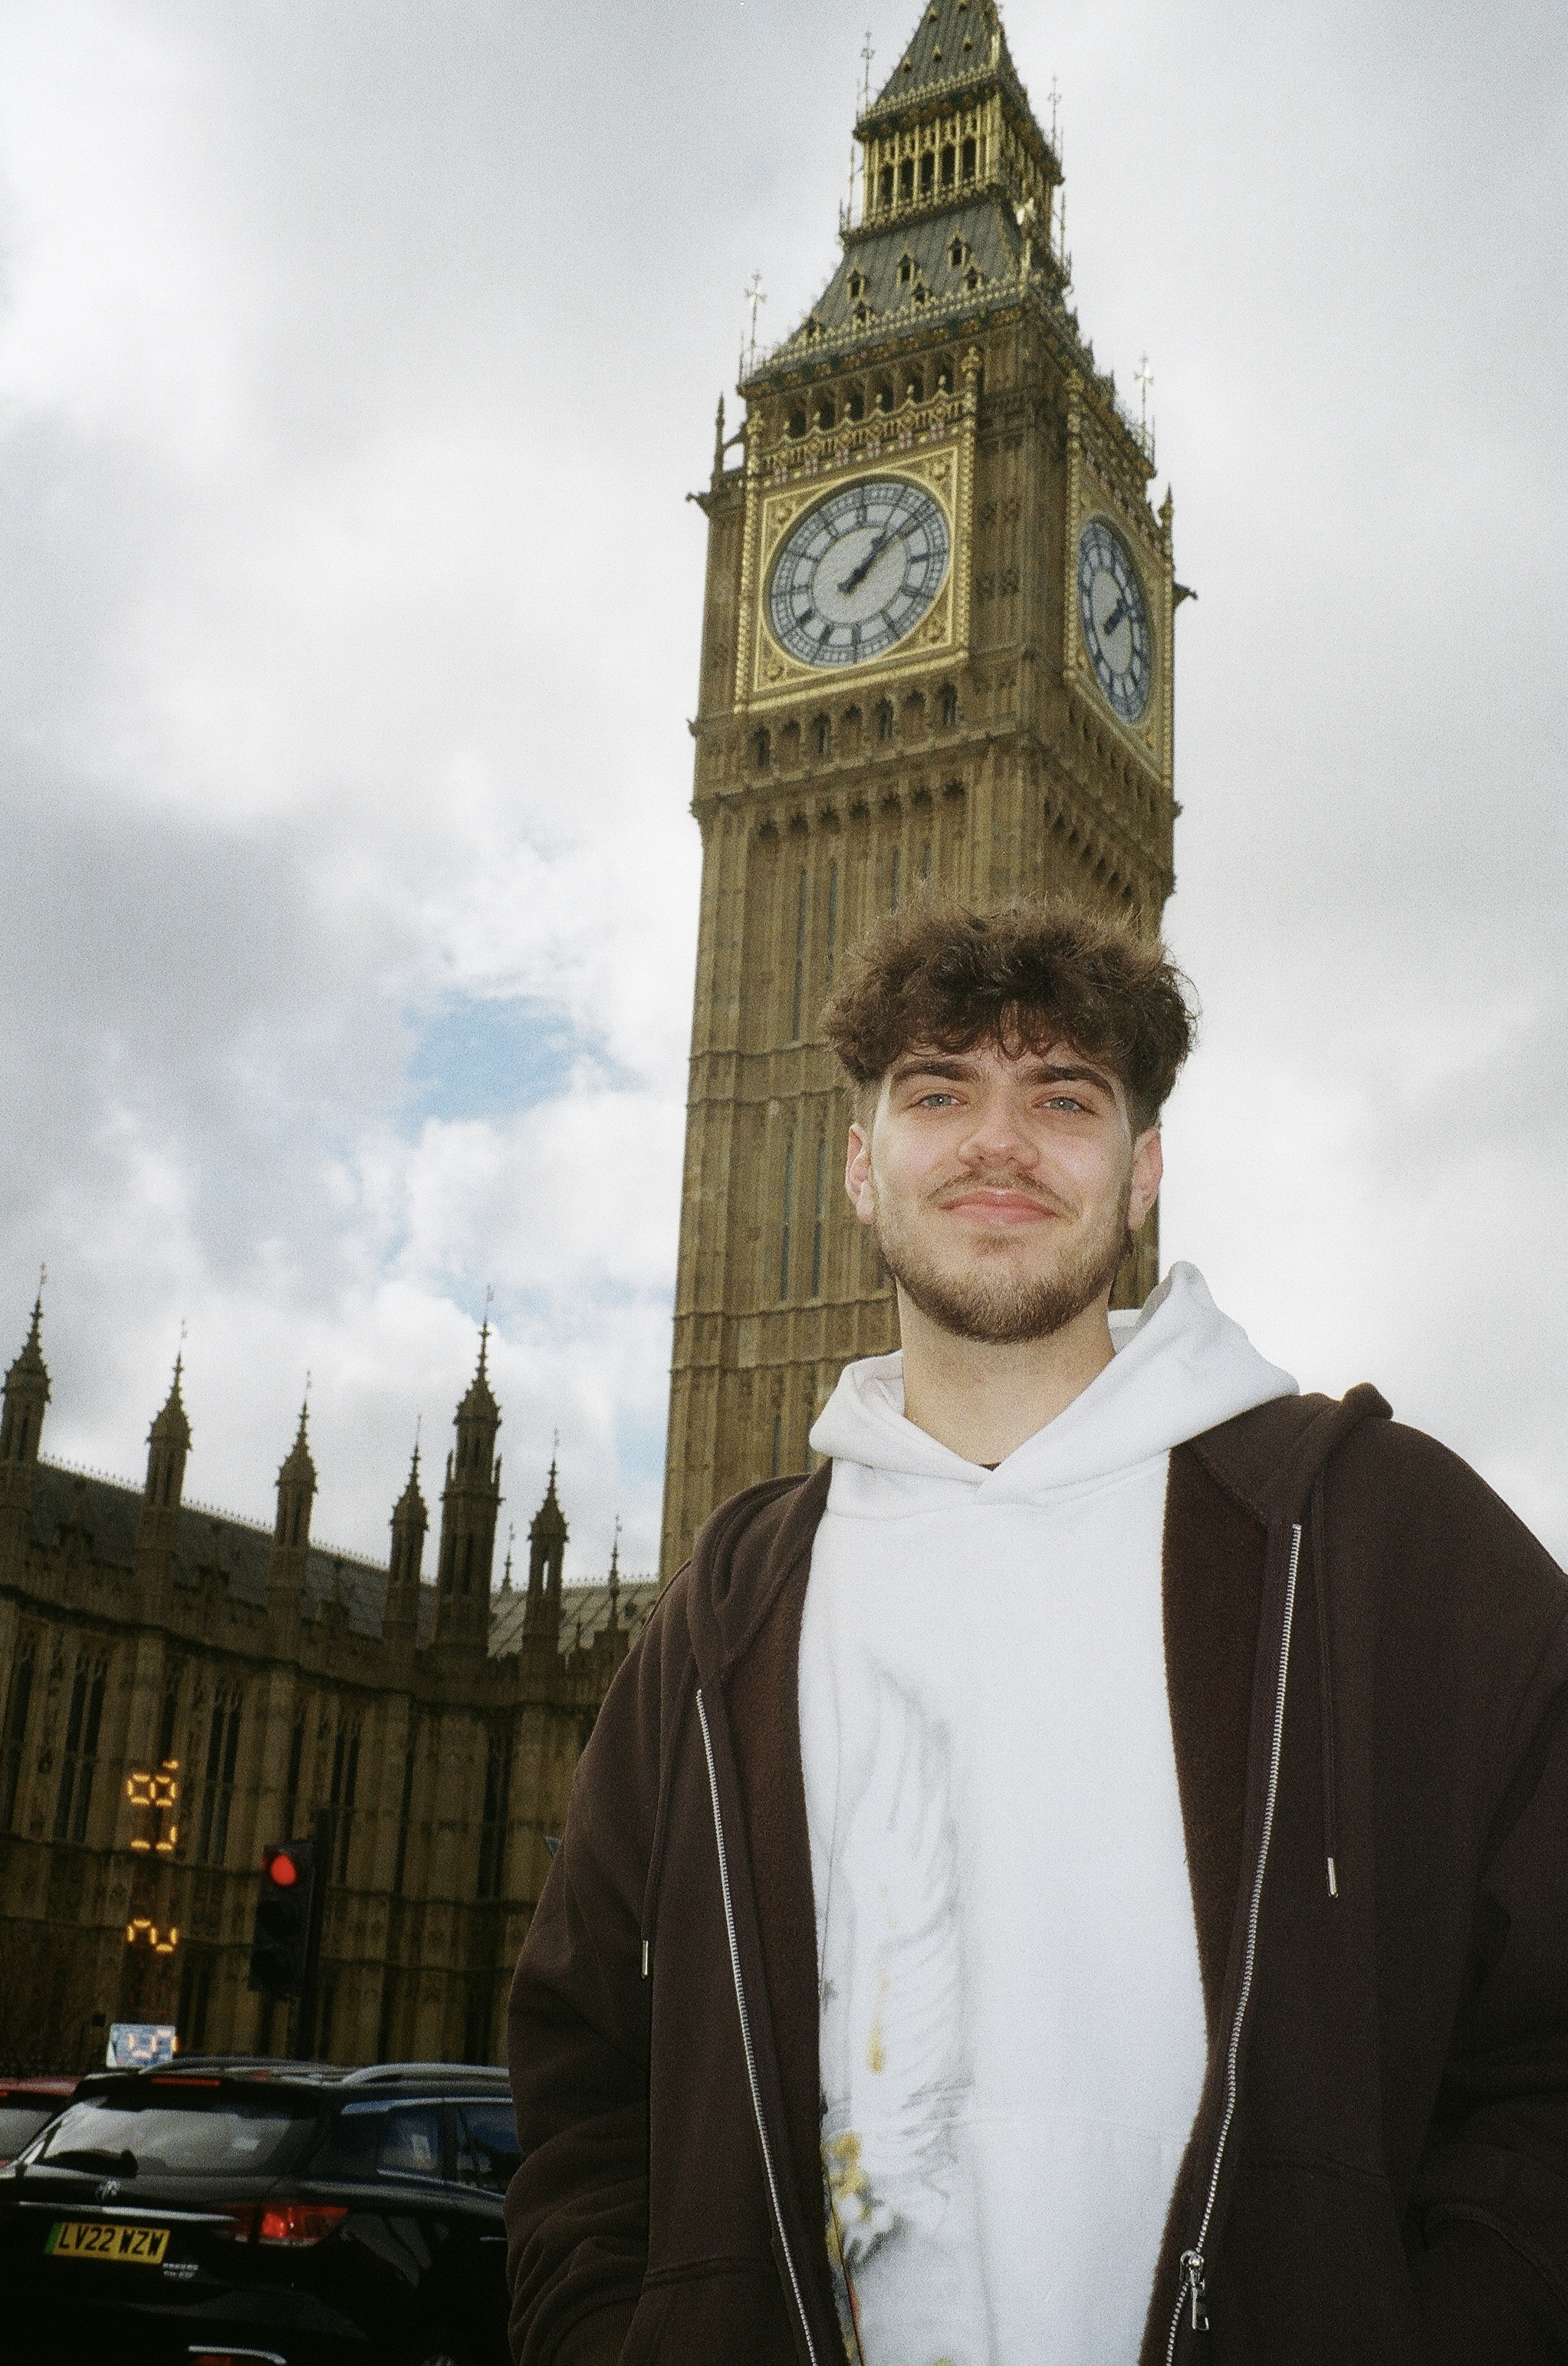 This photo depicts an image of a 20 year old boy with brown hair and a brown hoodie standing in front of the Big Ben in London, England.